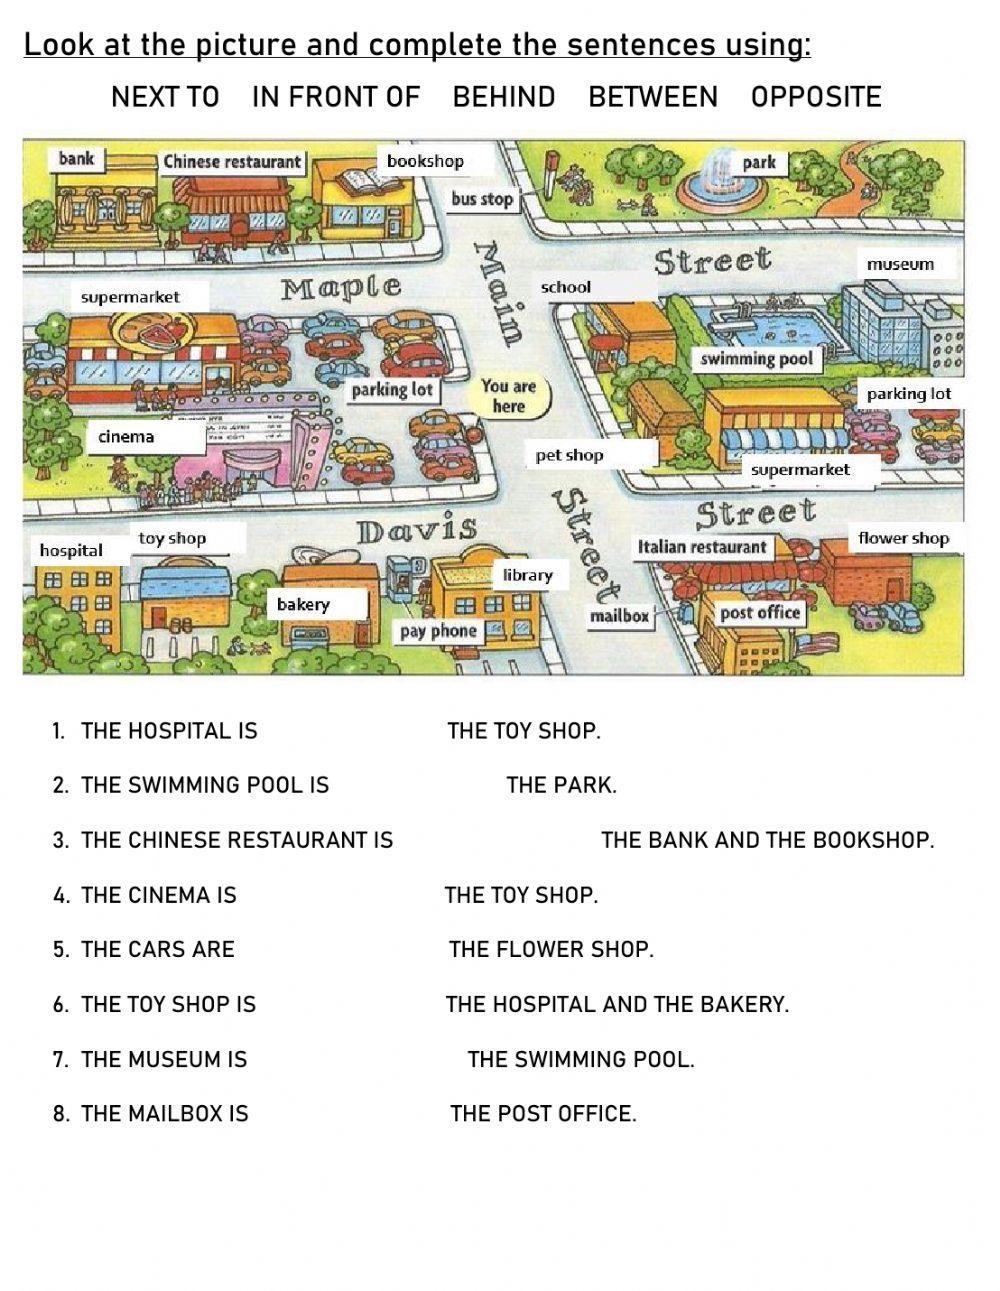 THE CITY - prepositions of place